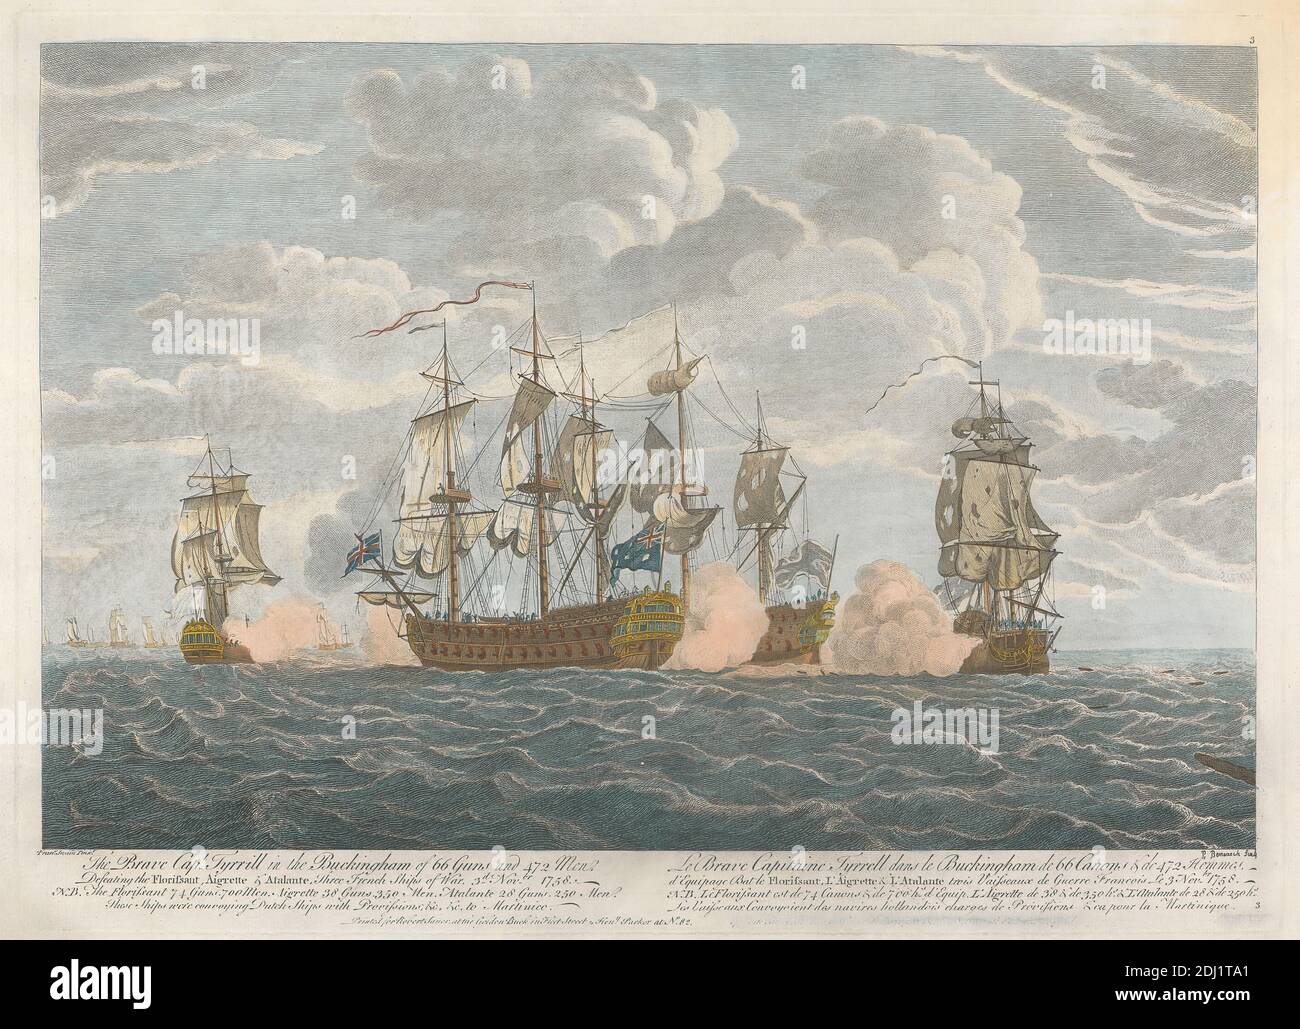 The Brave Captain Tyrrill in the Buckingham of 66 Guns and 472 Men, Defeating the Florissant, Aigrette & Atalante, Three French Ships of War, 3rd November, 1758, Print made by Peter P. Benazech, 1767–1794, after Francis Swaine, 1730–1782, British, Published by Robert Sayer, 1725–1794, British, Published by Henry Parker, 1725–1809, British, ca. 1760, Line engraving and etching, hand colored on moderately thick, slightly textured, cream laid paper, Sheet: 14 1/2 x 21 inches (36.9 x 53.4 cm), Plate: 13 3/8 x 18 5/16 inches (34 x 46.5 cm), and Image: 10 1/8 x 17 5/8 inches (25.7 x 44.7 cm), battle Stock Photo